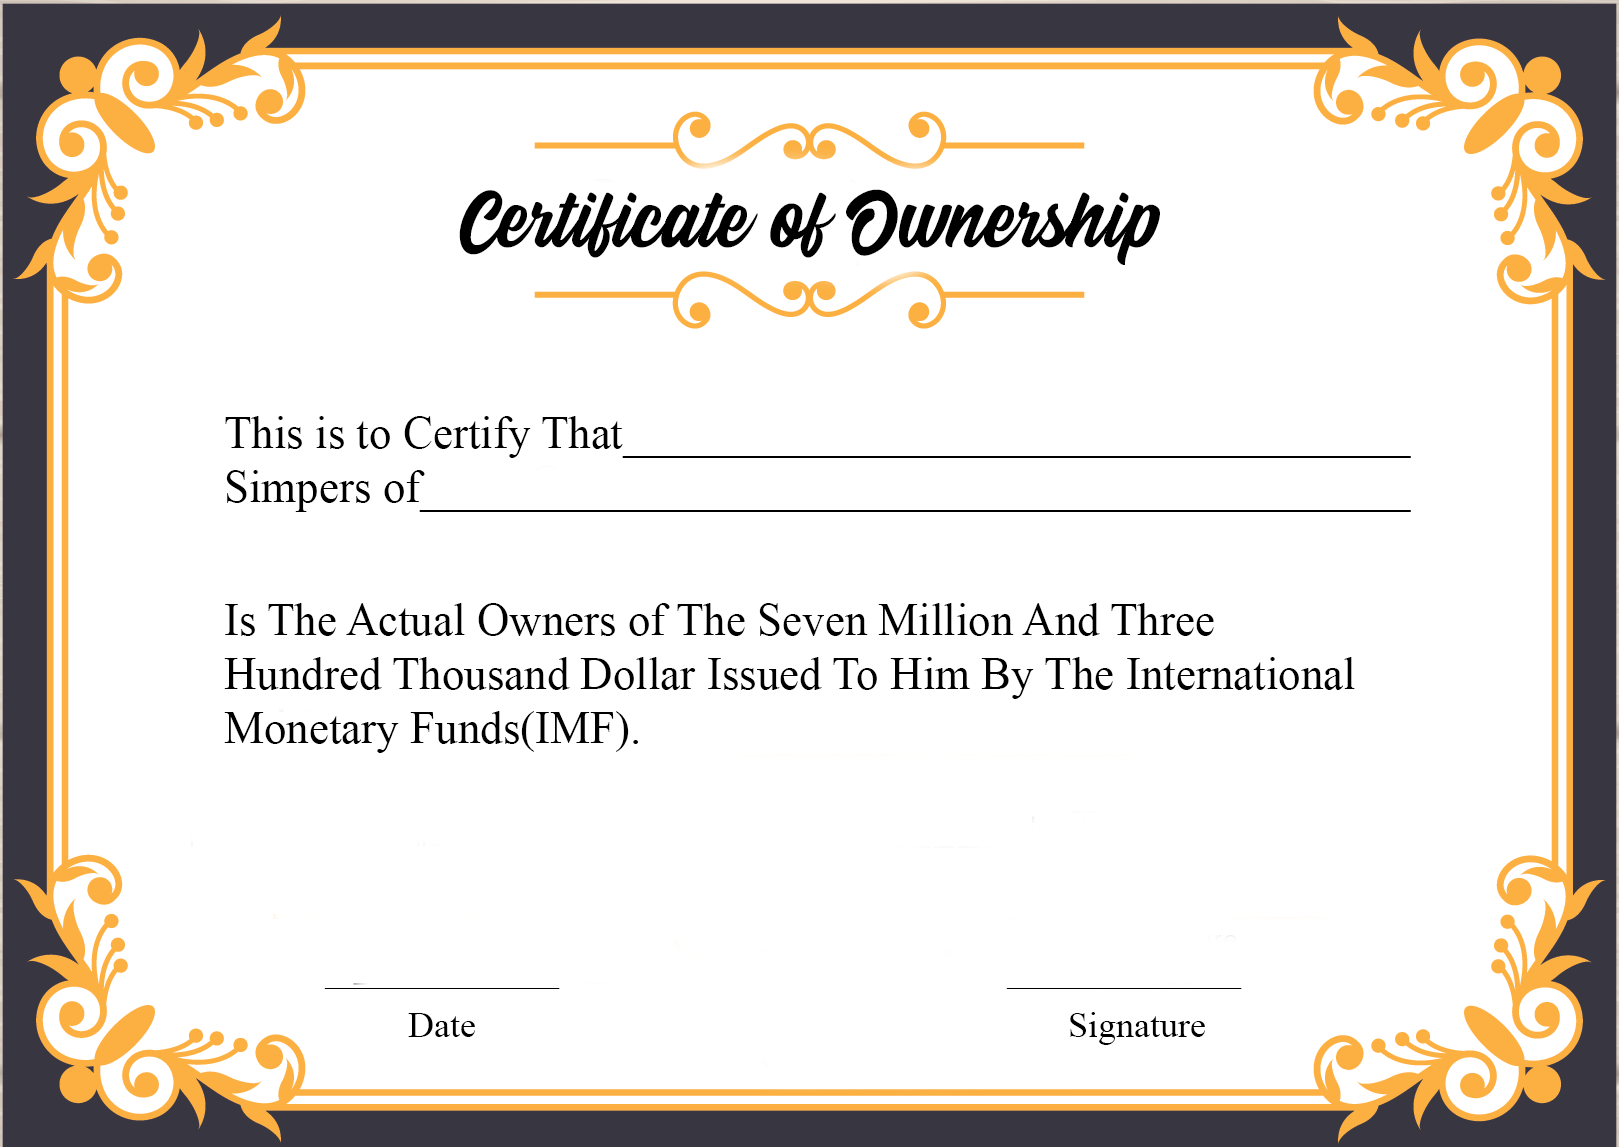 ❤️5+ Free Sample Of Certificate Of Ownership Form Template❤️ Regarding Ownership Certificate Template